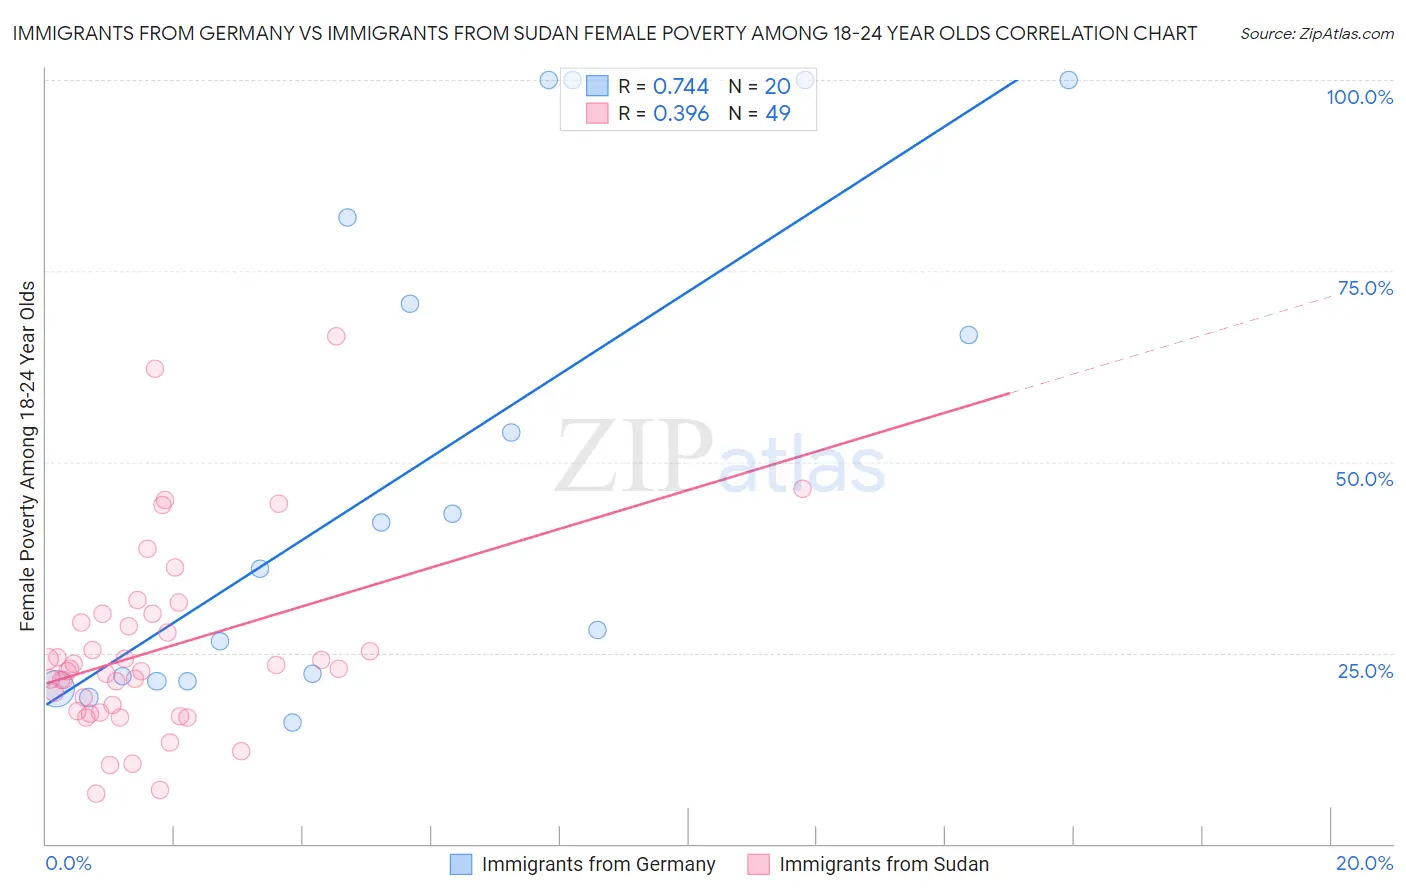 Immigrants from Germany vs Immigrants from Sudan Female Poverty Among 18-24 Year Olds